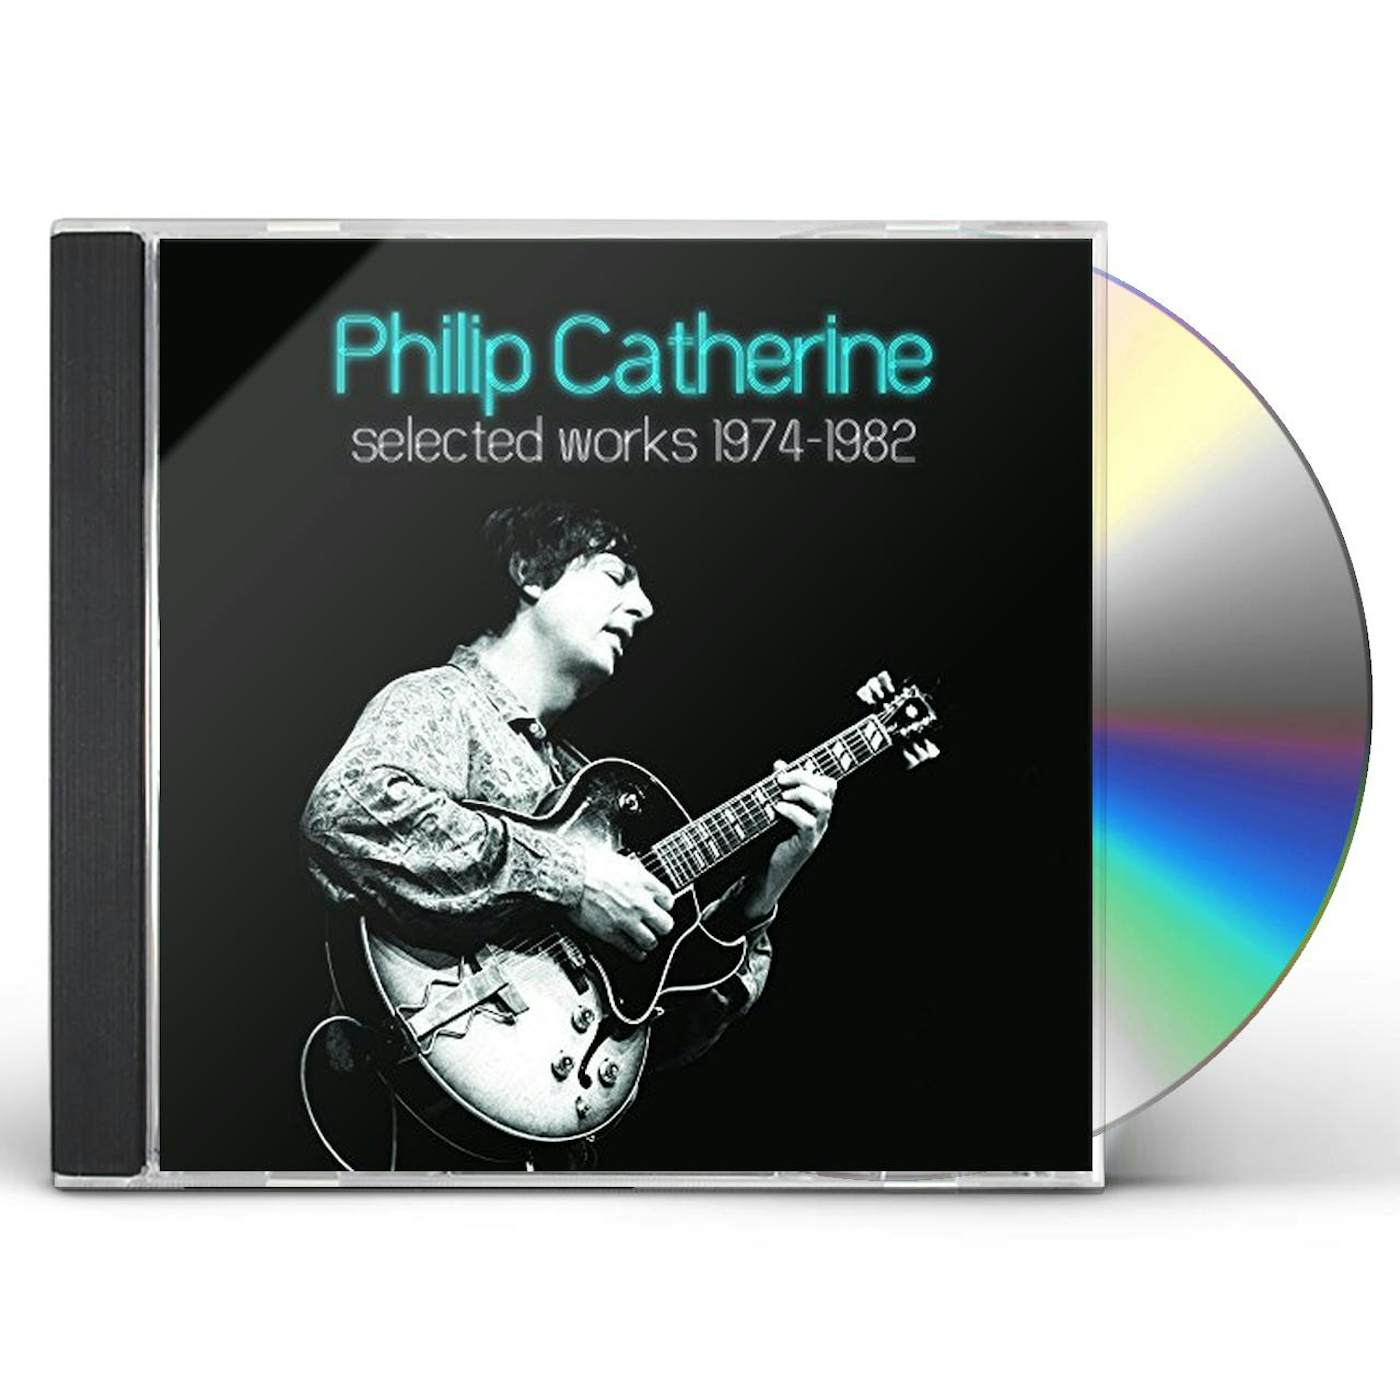 Philip Catherine SELECTED WORKS 1974-1982 CD